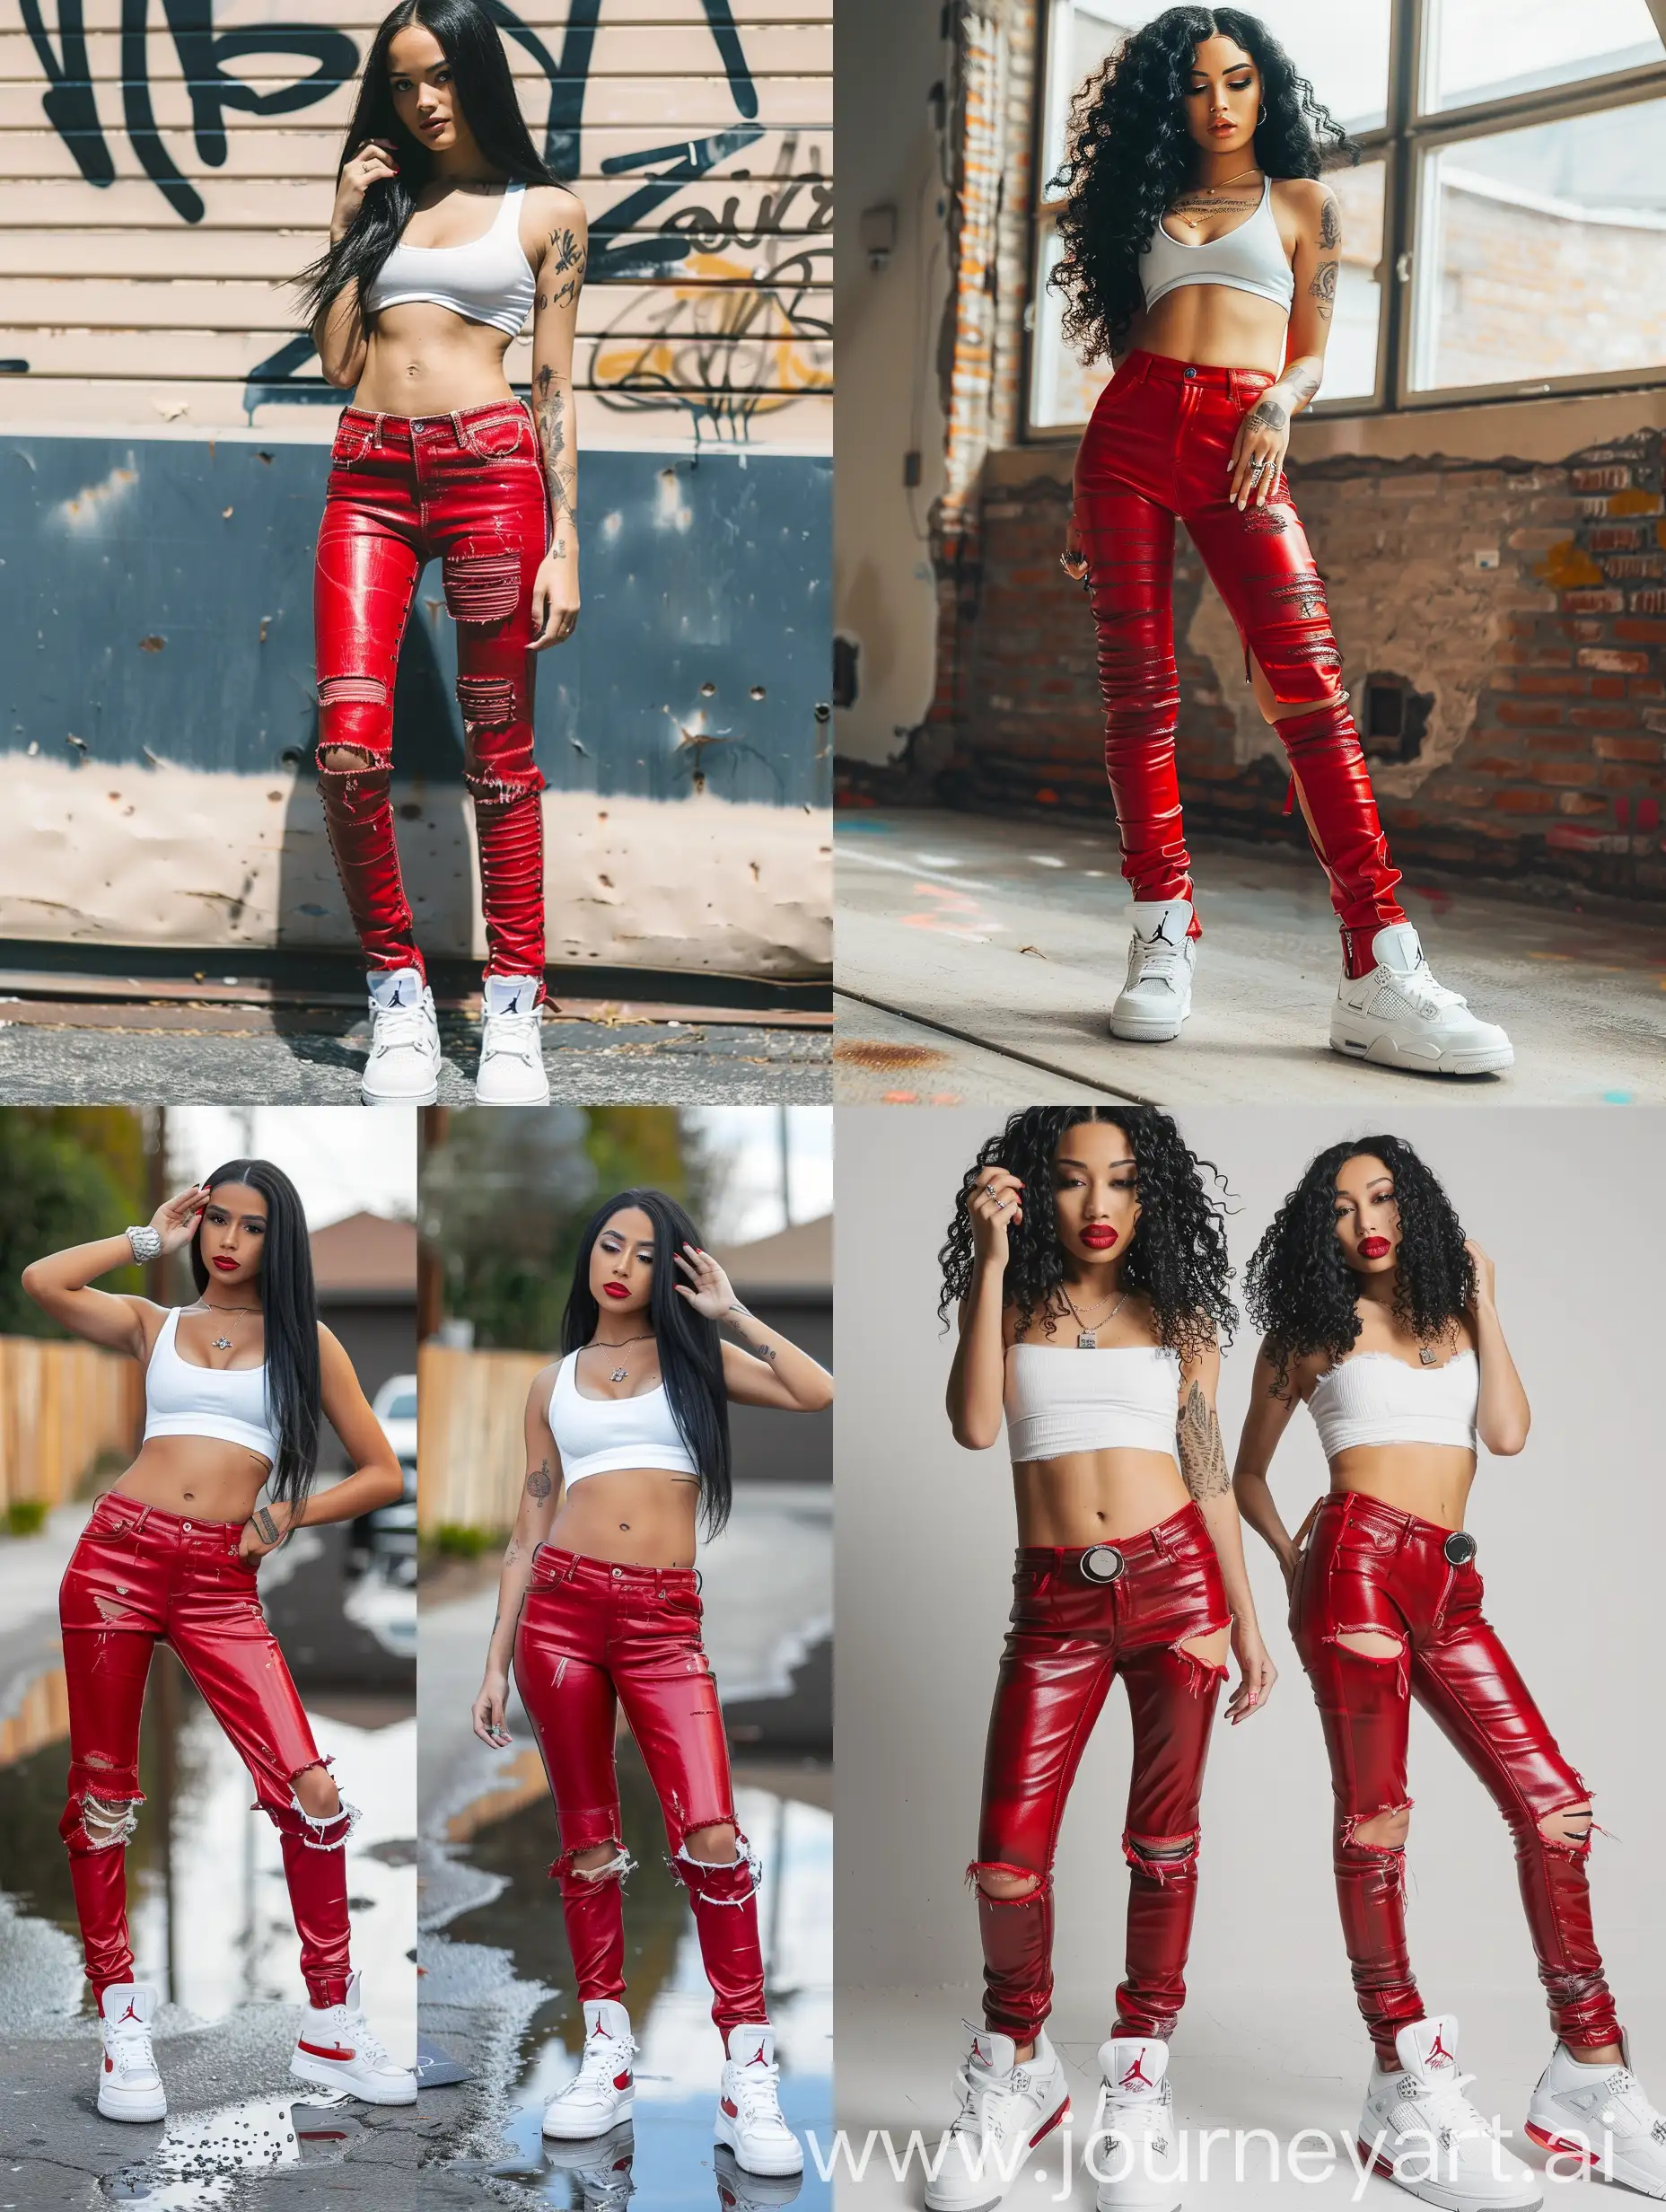 Fashionable-Instagram-Model-in-Red-Leather-Jeans-and-Jordan-4s